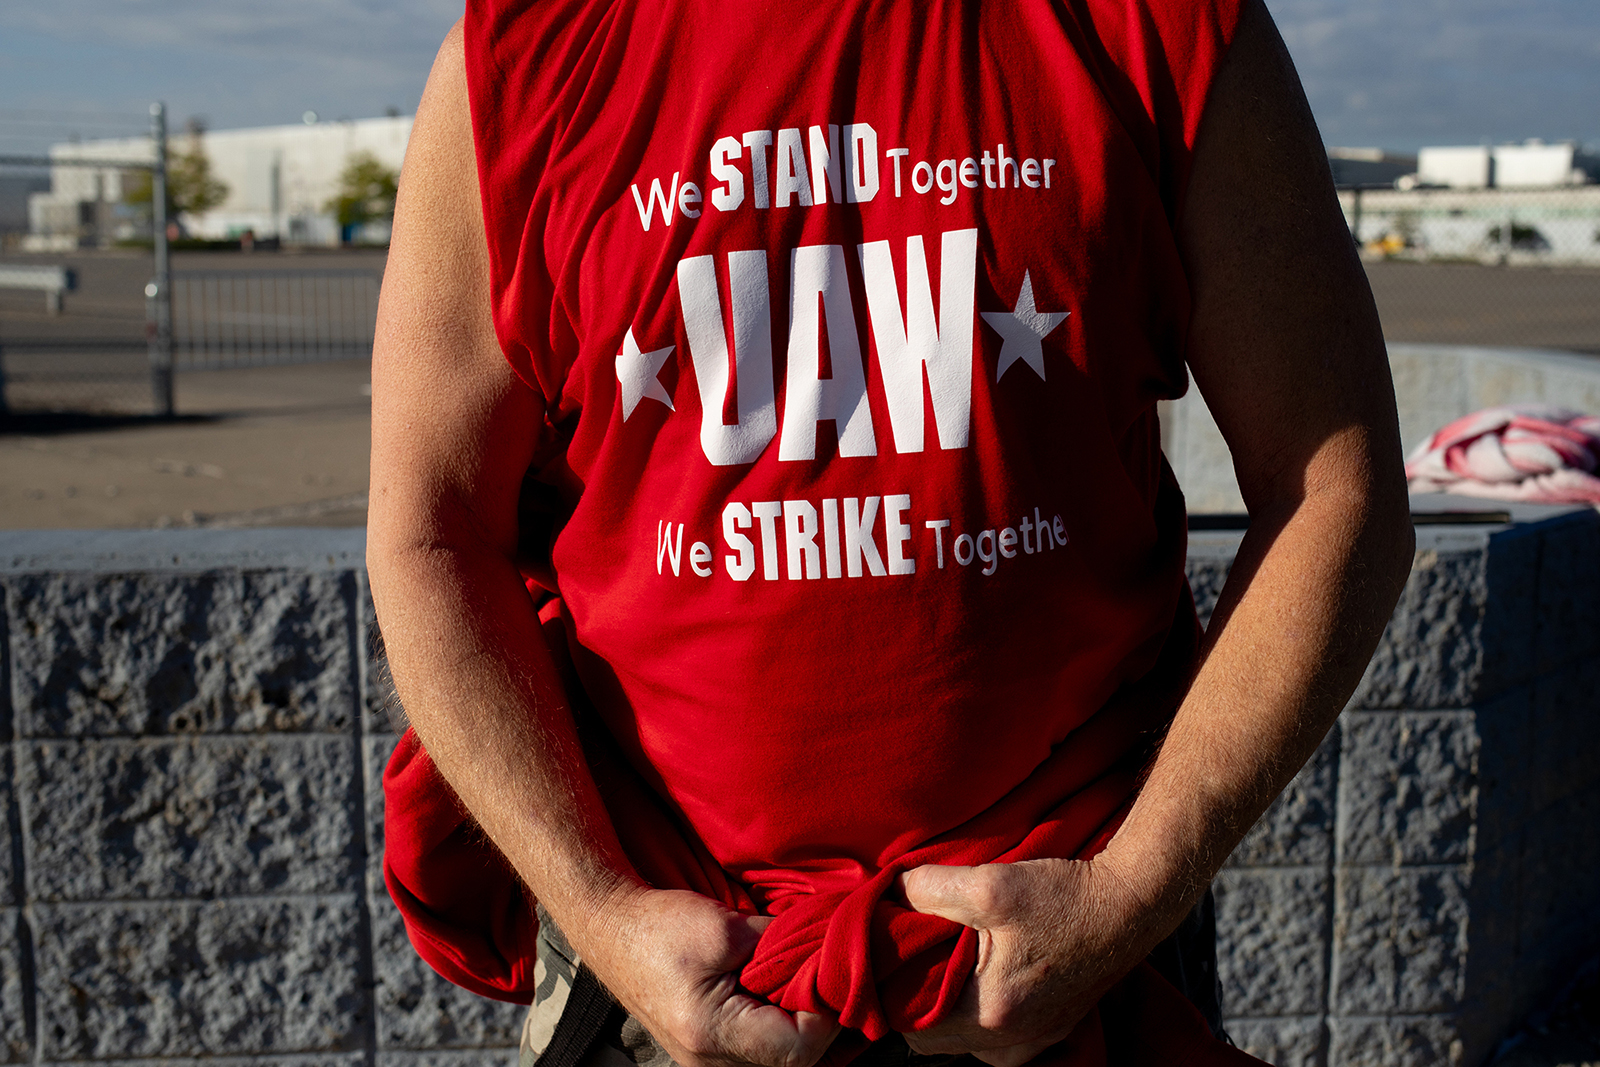 A United Auto Workers member wears a shirt supporting the strike on a picket line outside the Ford Motor Co. Michigan assembly plant in Wayne, Michigan, today.